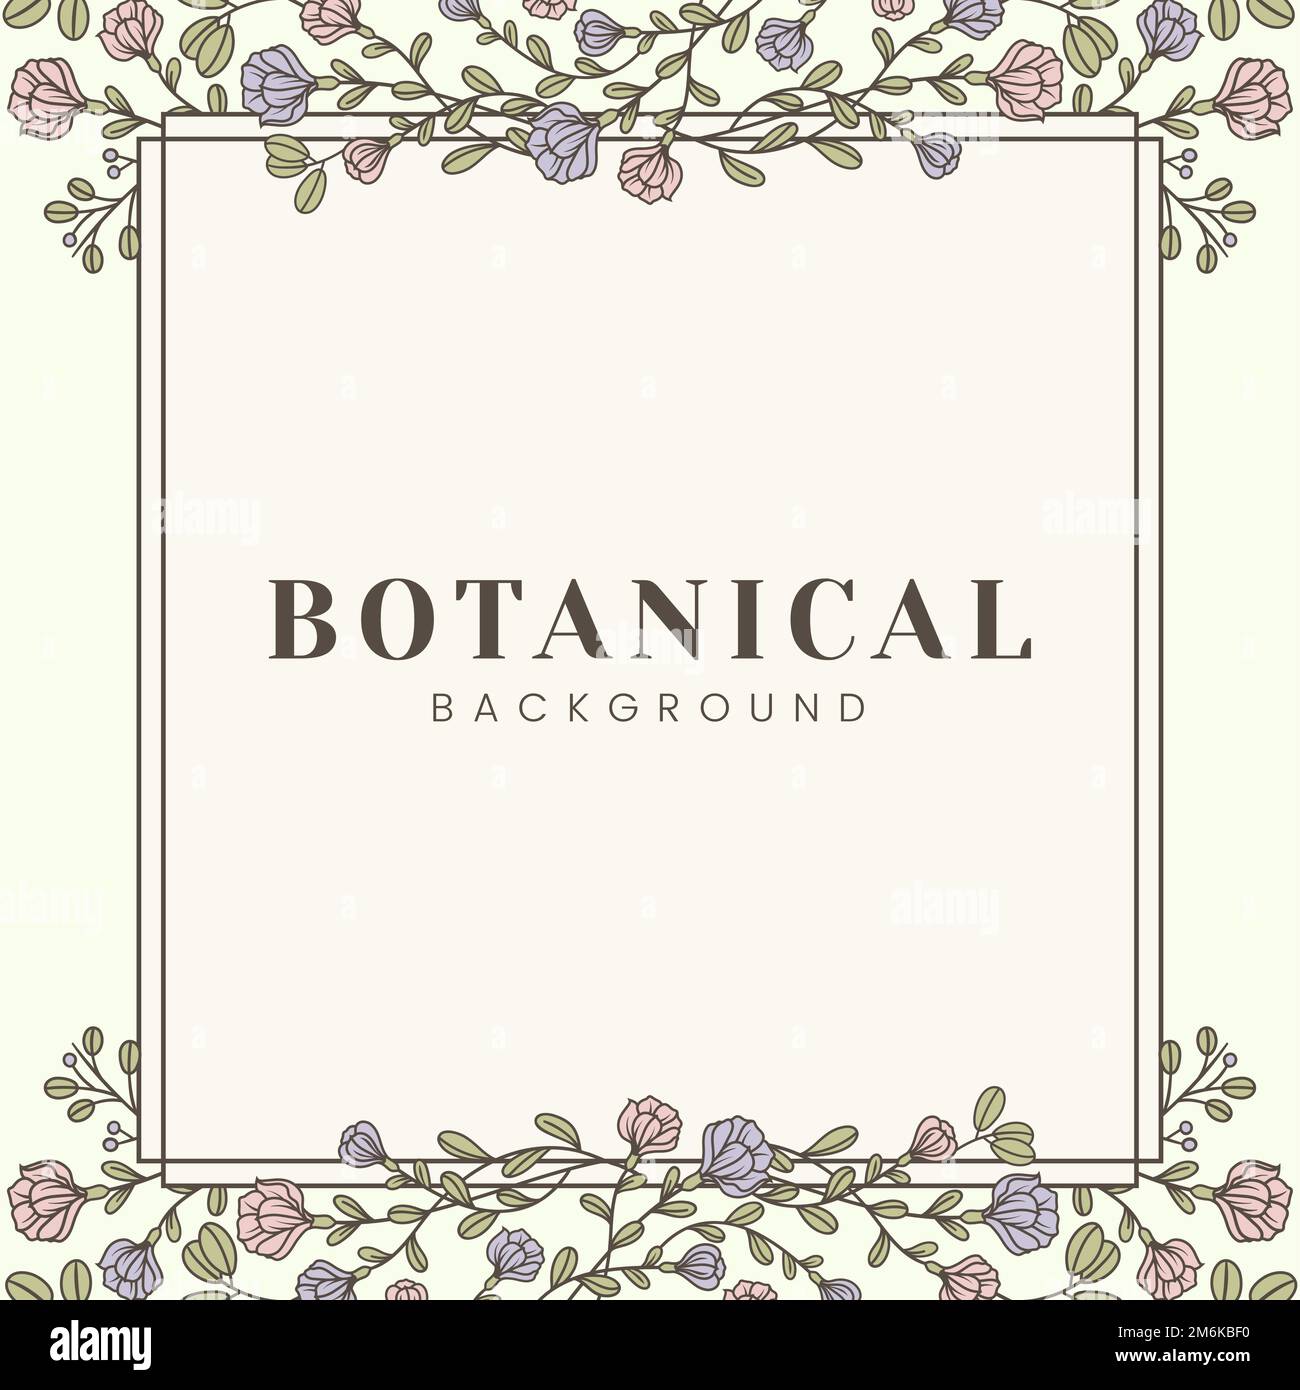 Botanical background with floral frame vector Stock Vector